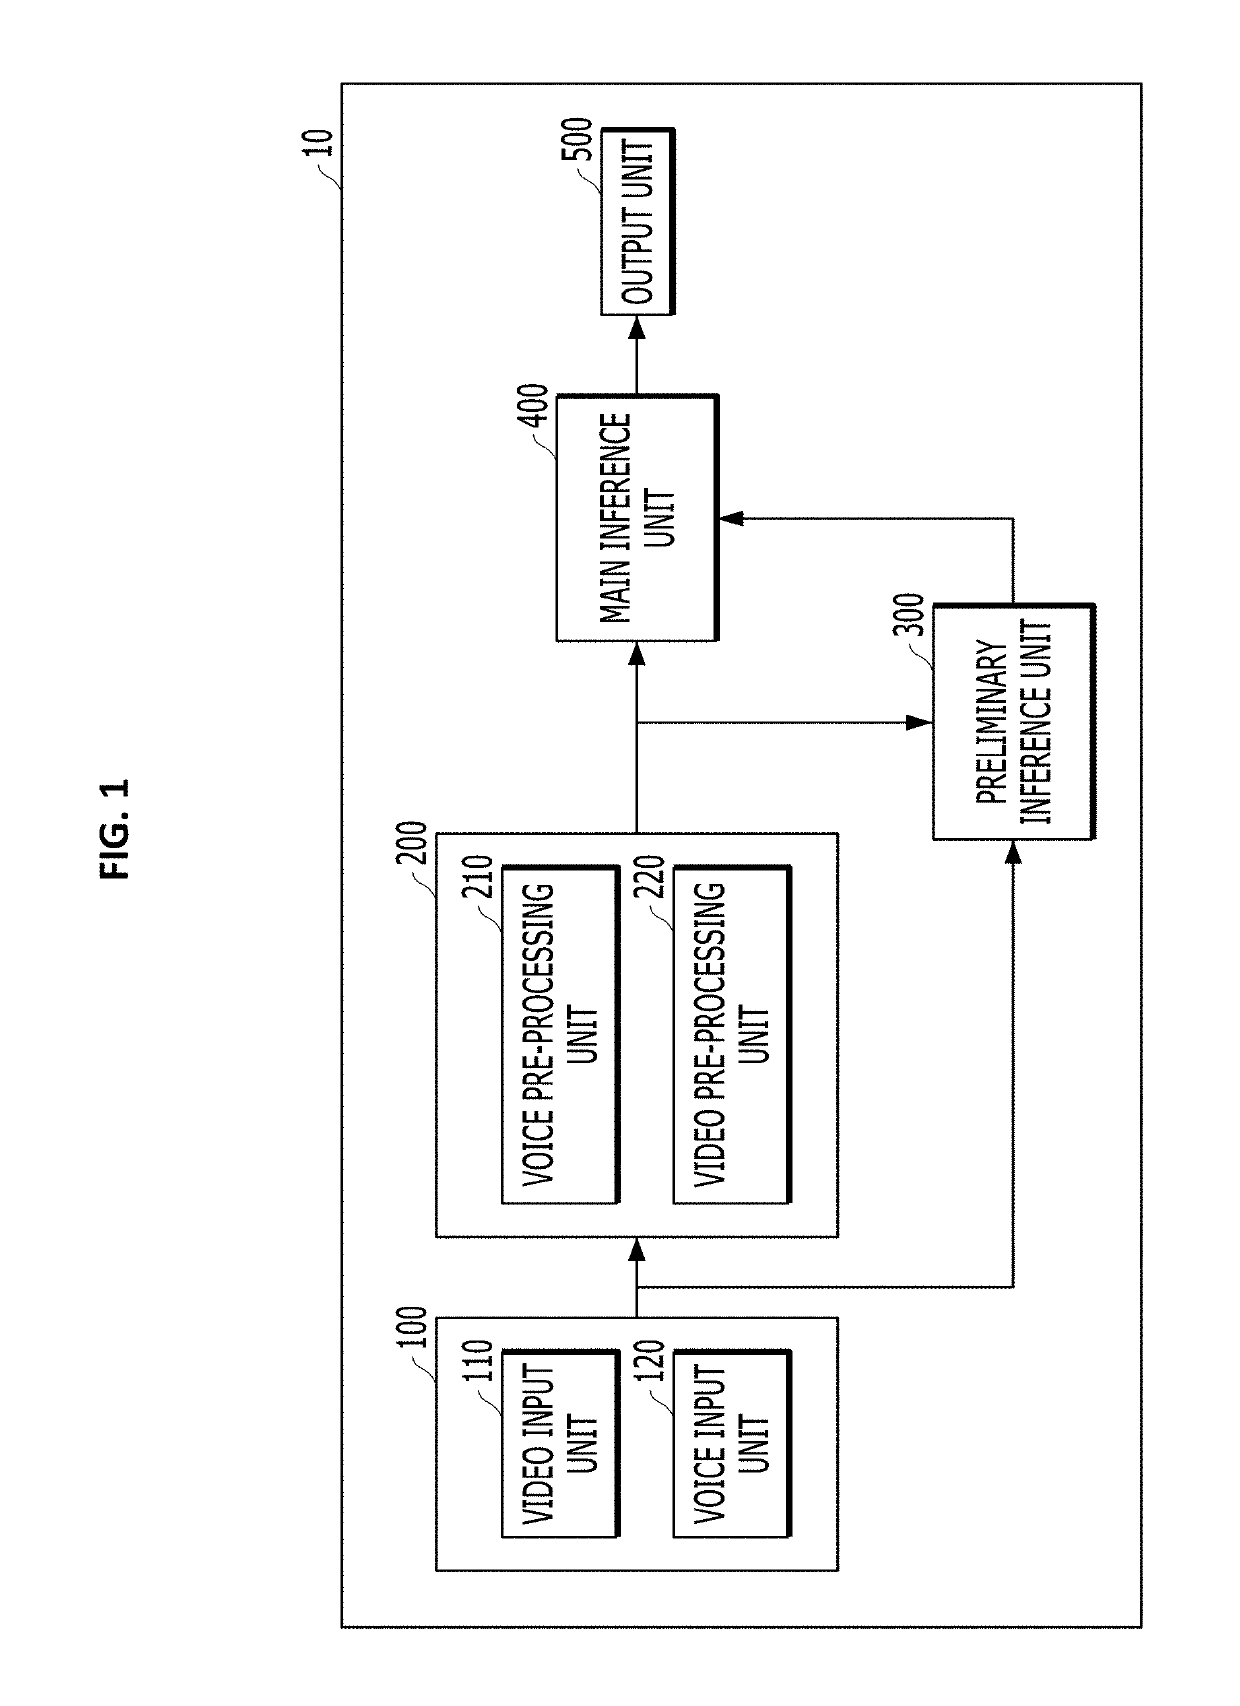 Multi-modal emotion recognition device, method, and storage medium using artificial intelligence